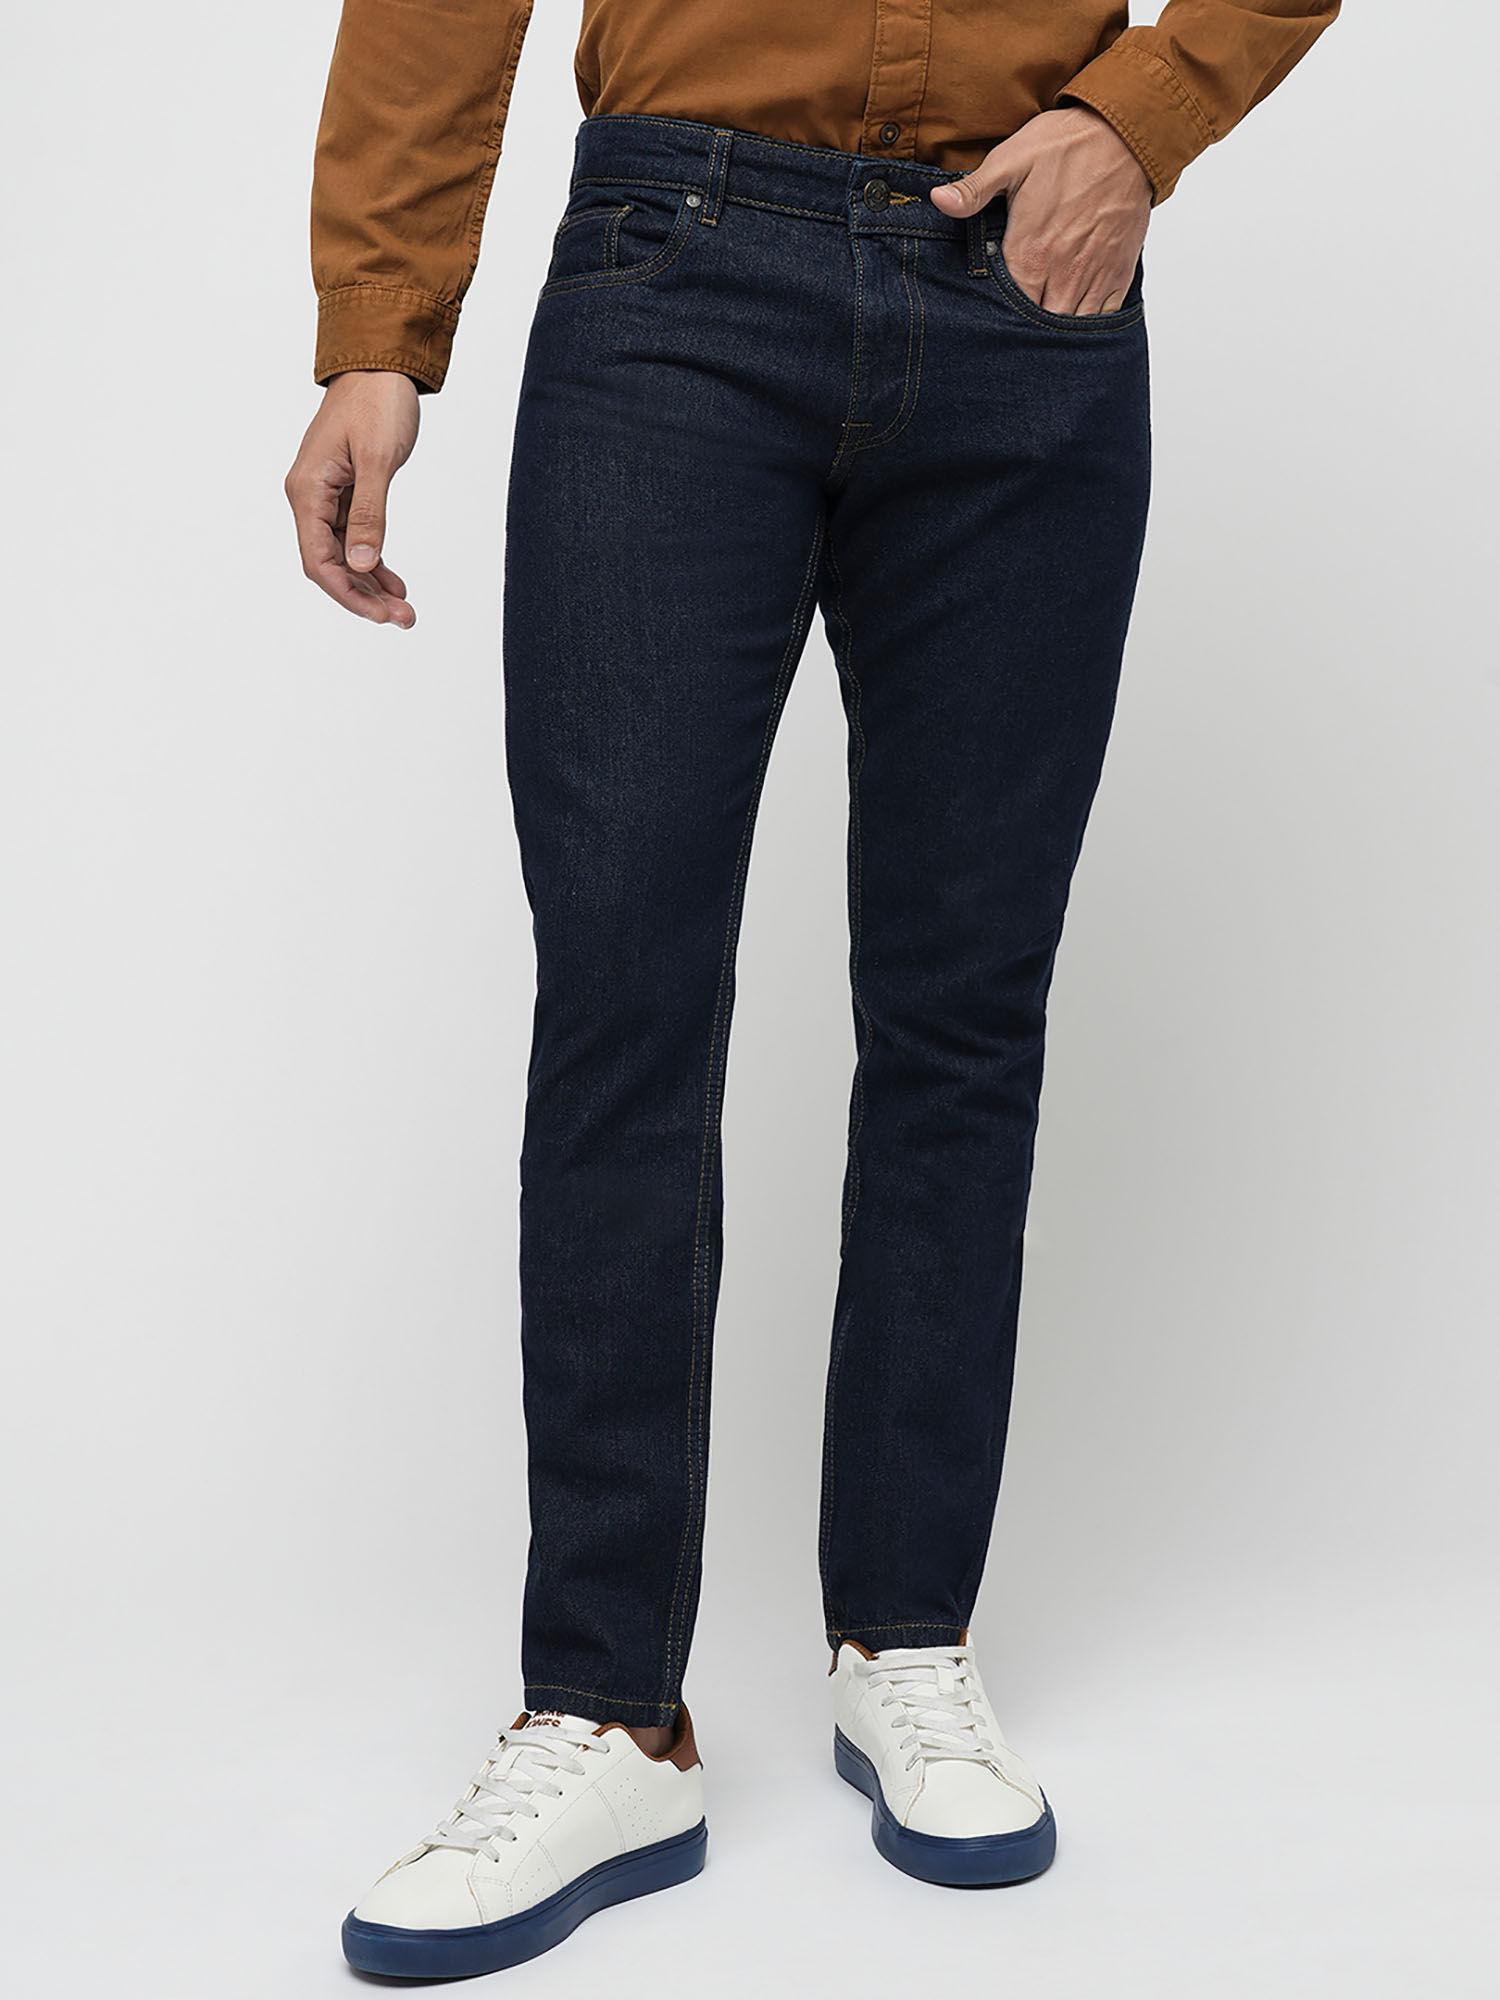 navy blue slim fit non stretch jeans